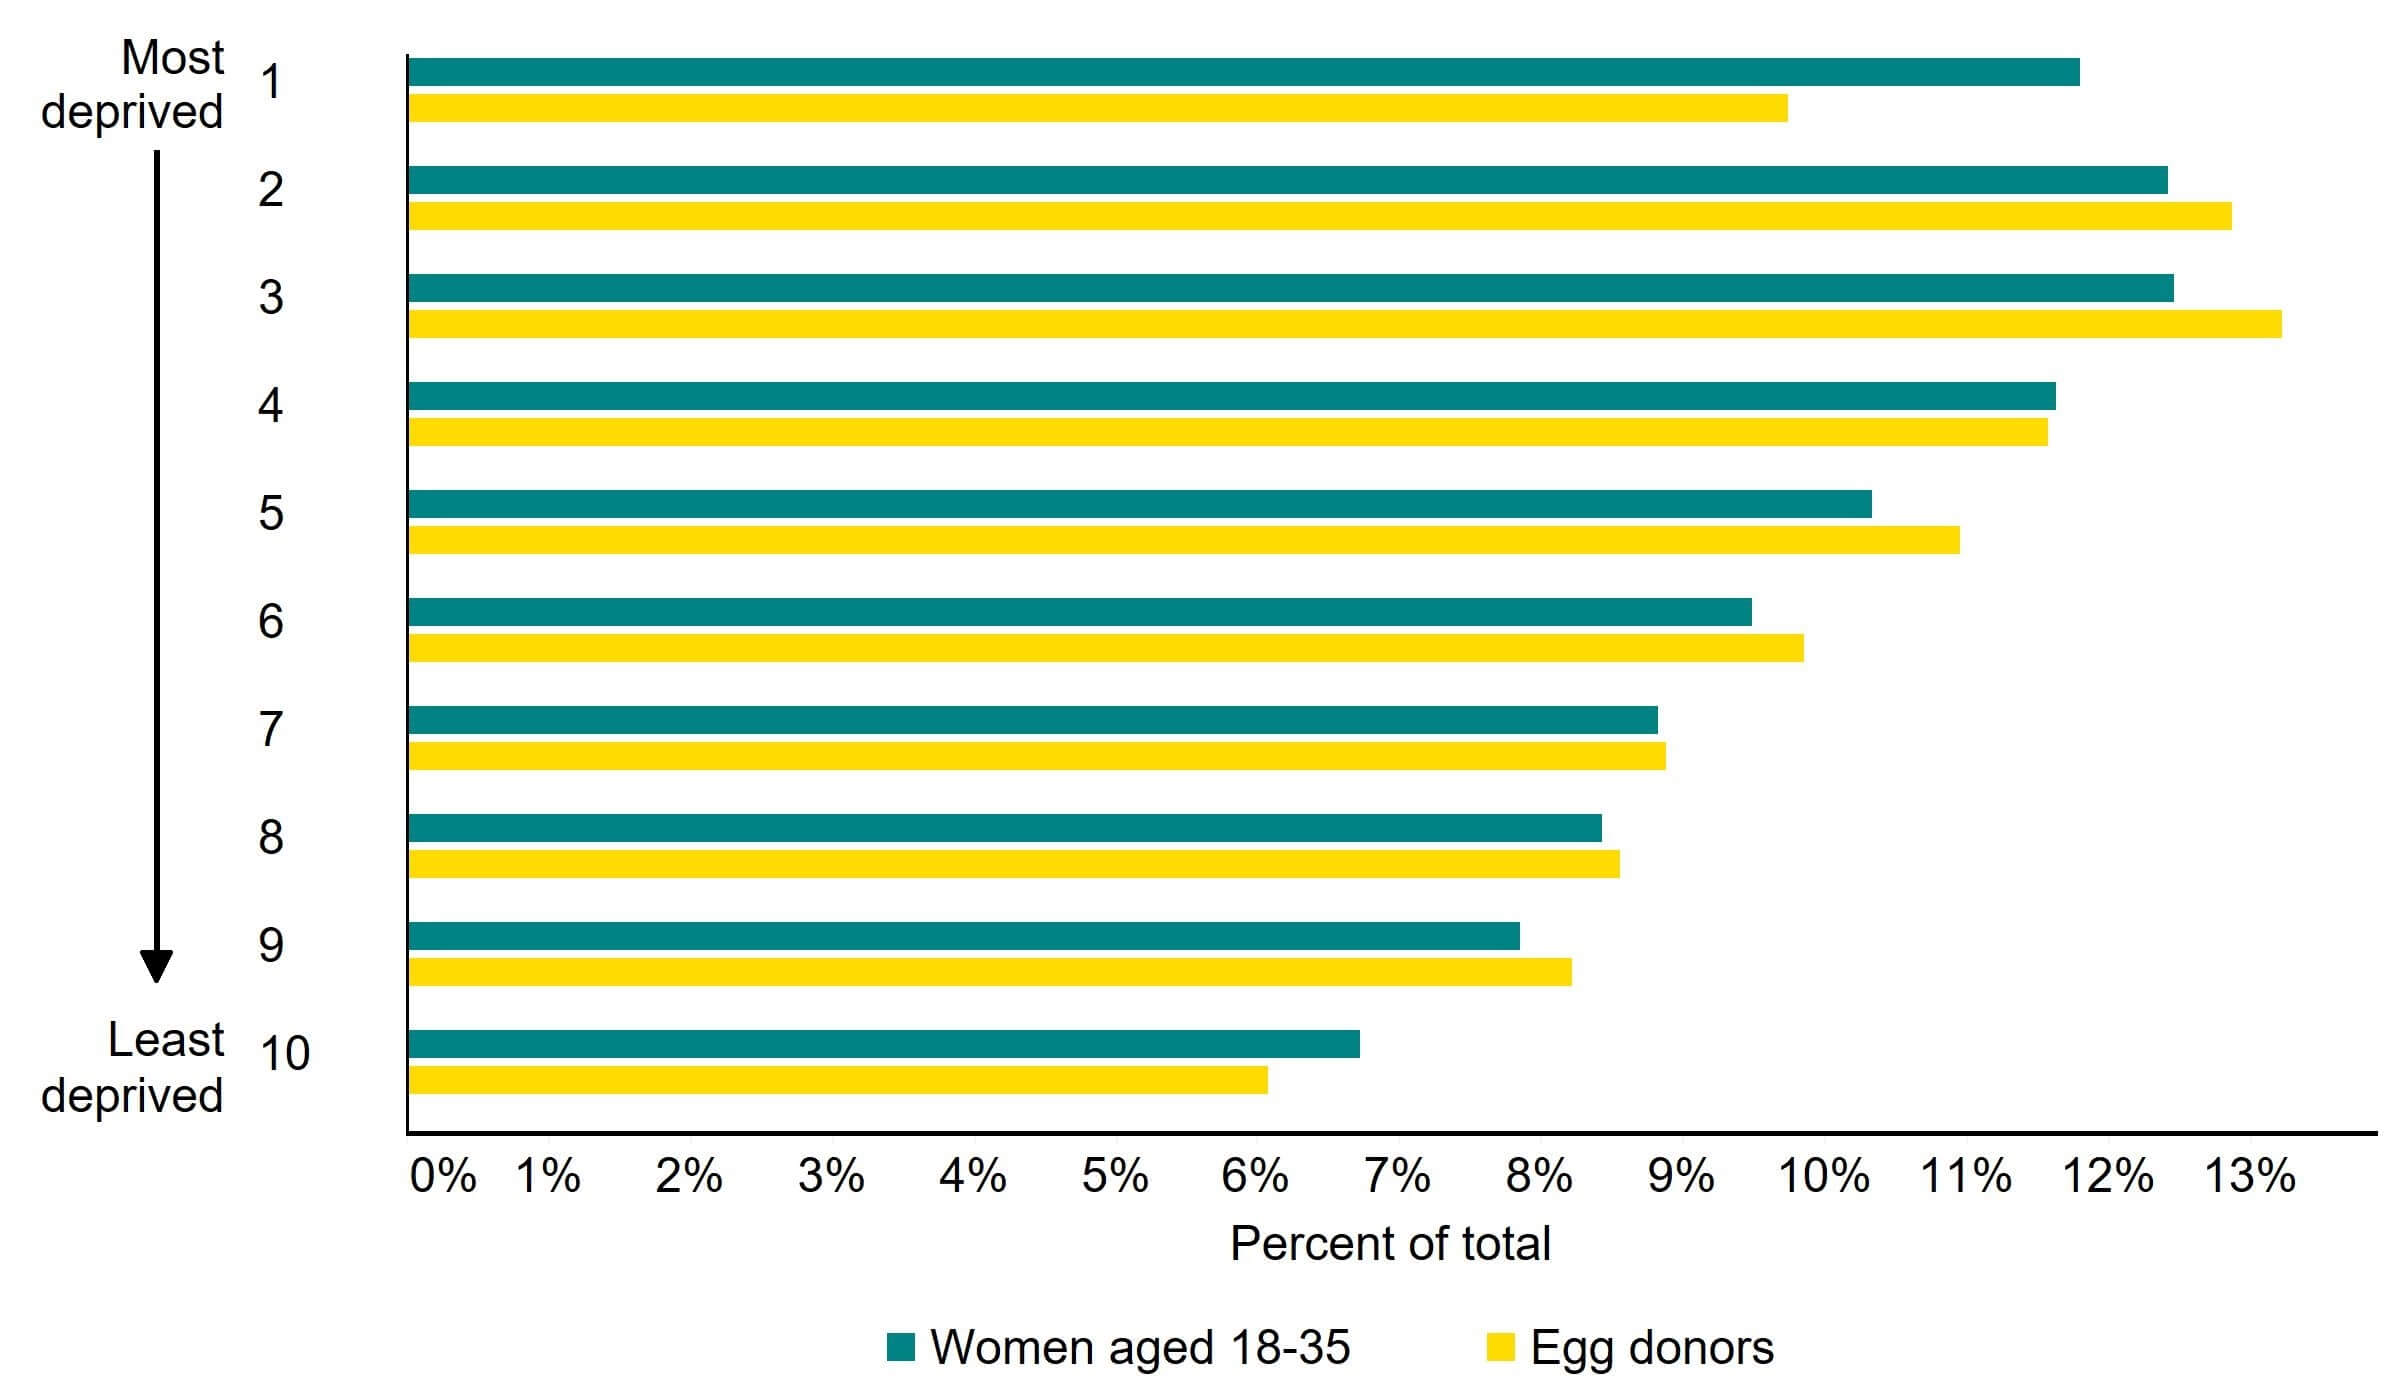 Bar graph showing similar proportions of egg donors in each deprivation decile compared to the general population.